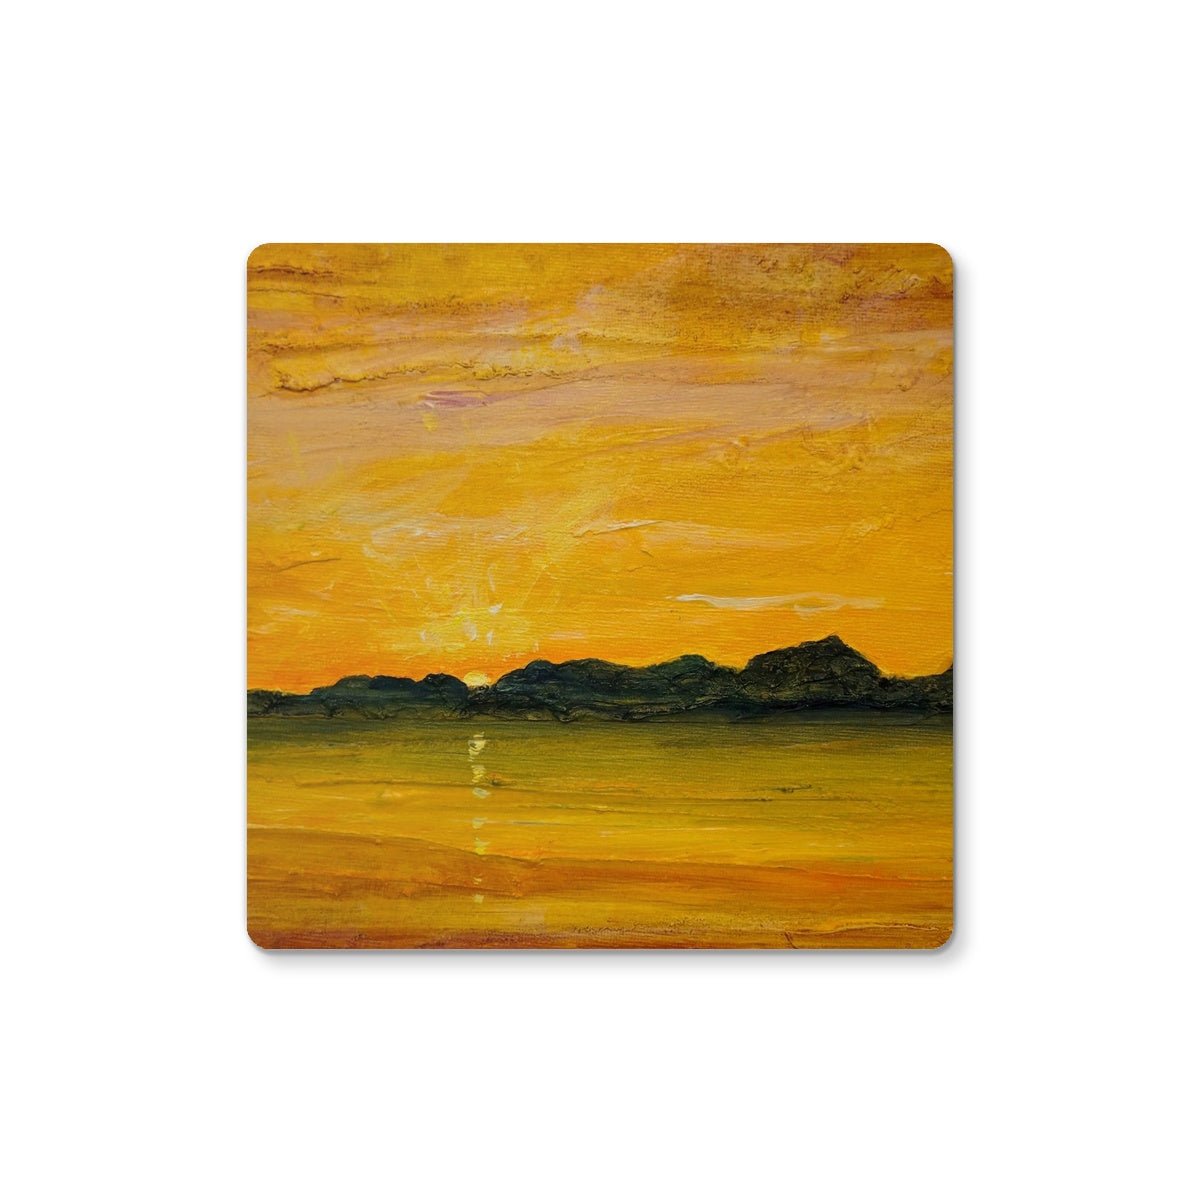 Jura Sunset Art Gifts Coaster-Coasters-Hebridean Islands Art Gallery-4 Coasters-Paintings, Prints, Homeware, Art Gifts From Scotland By Scottish Artist Kevin Hunter